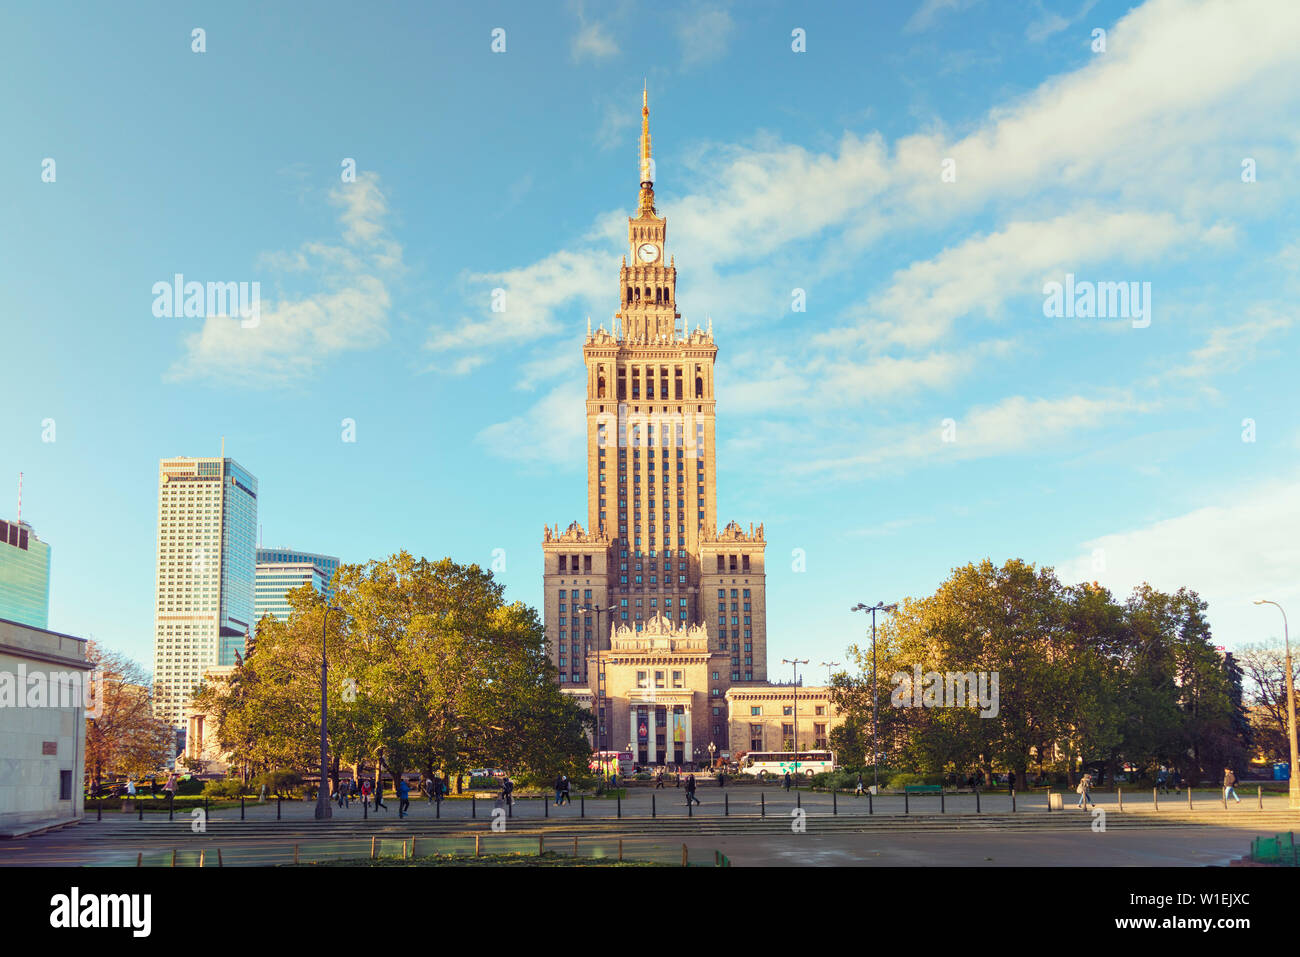 Palace of Culture and Science (Palac Kultury i Nauki), built in the 1950s, Warsaw, Poland, Europe Stock Photo